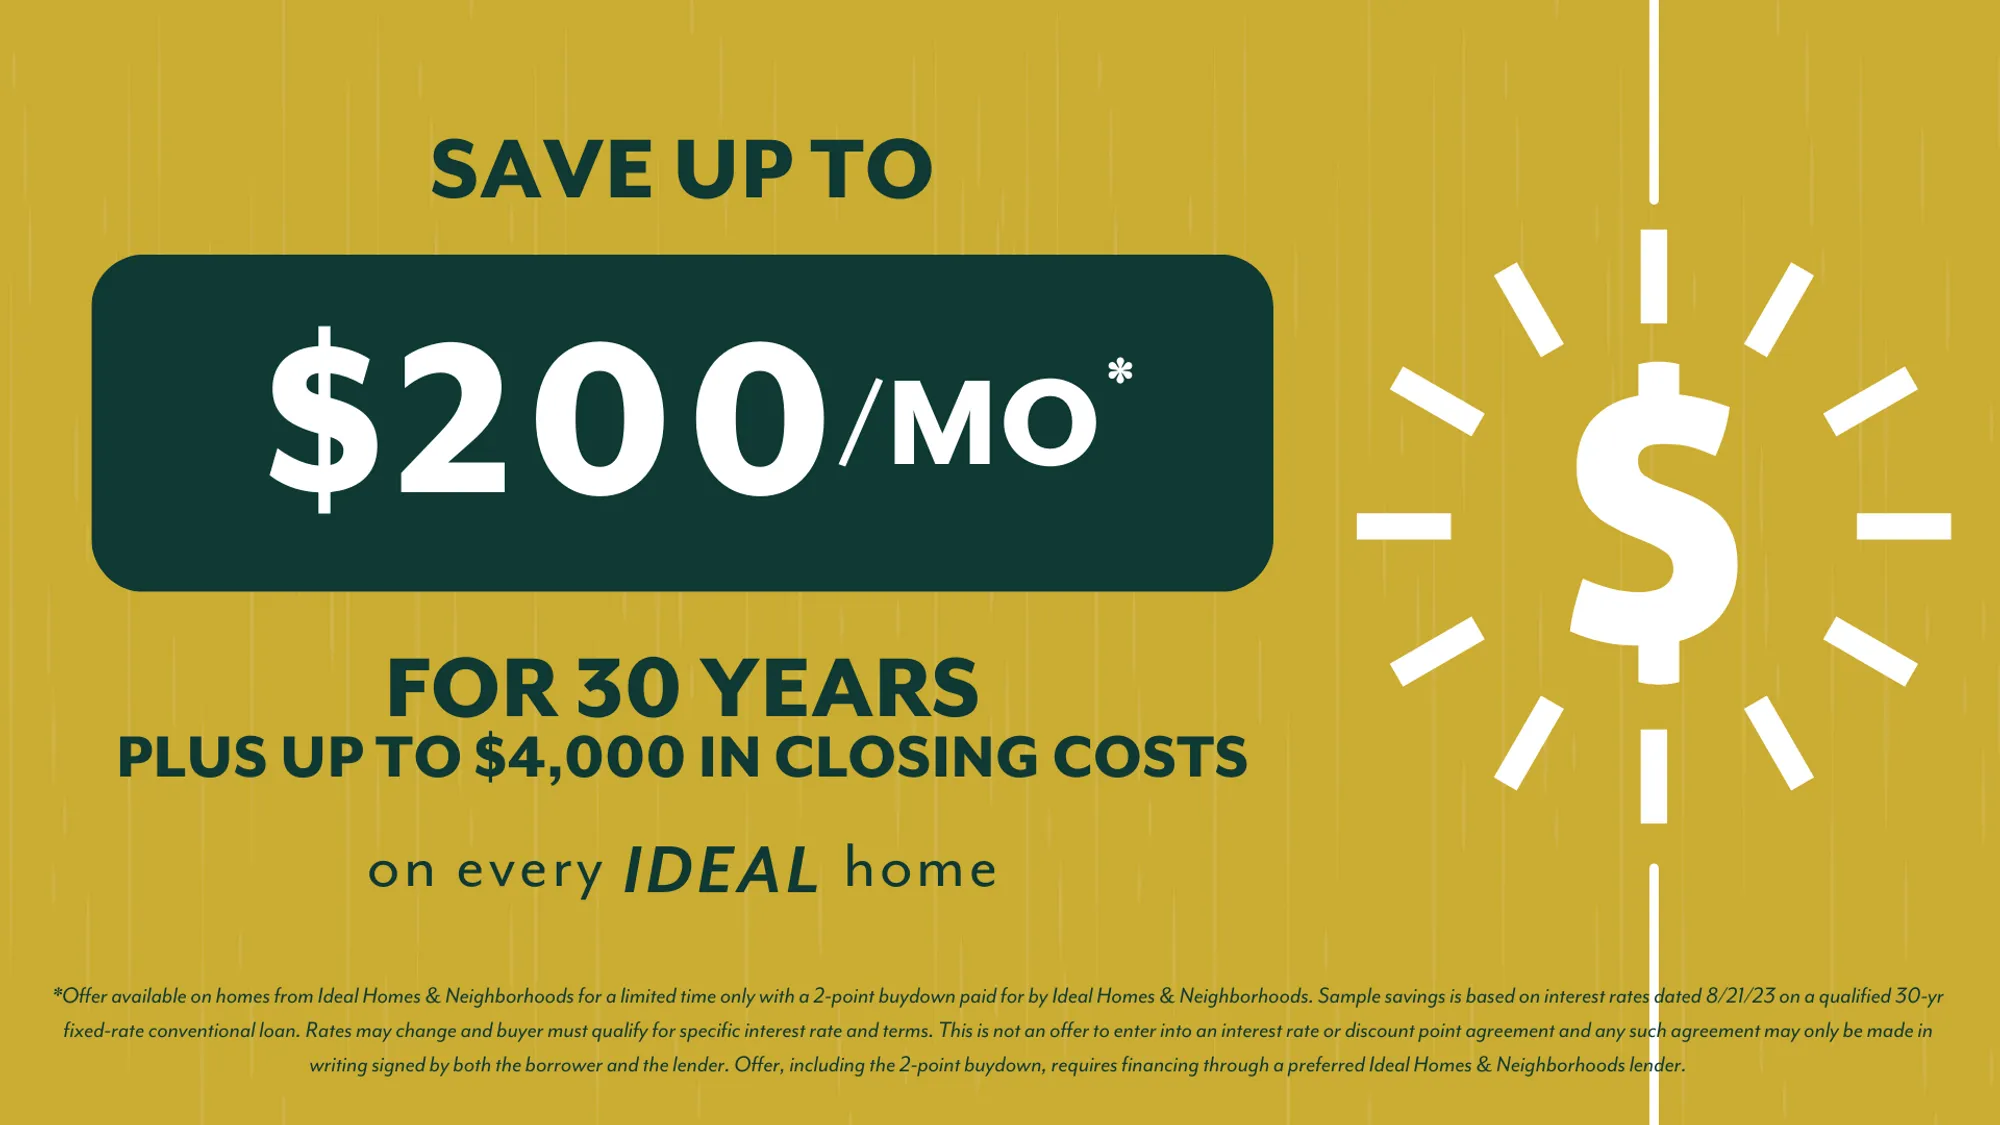 Save up to $200/mo and up to $4,000 in closing costs